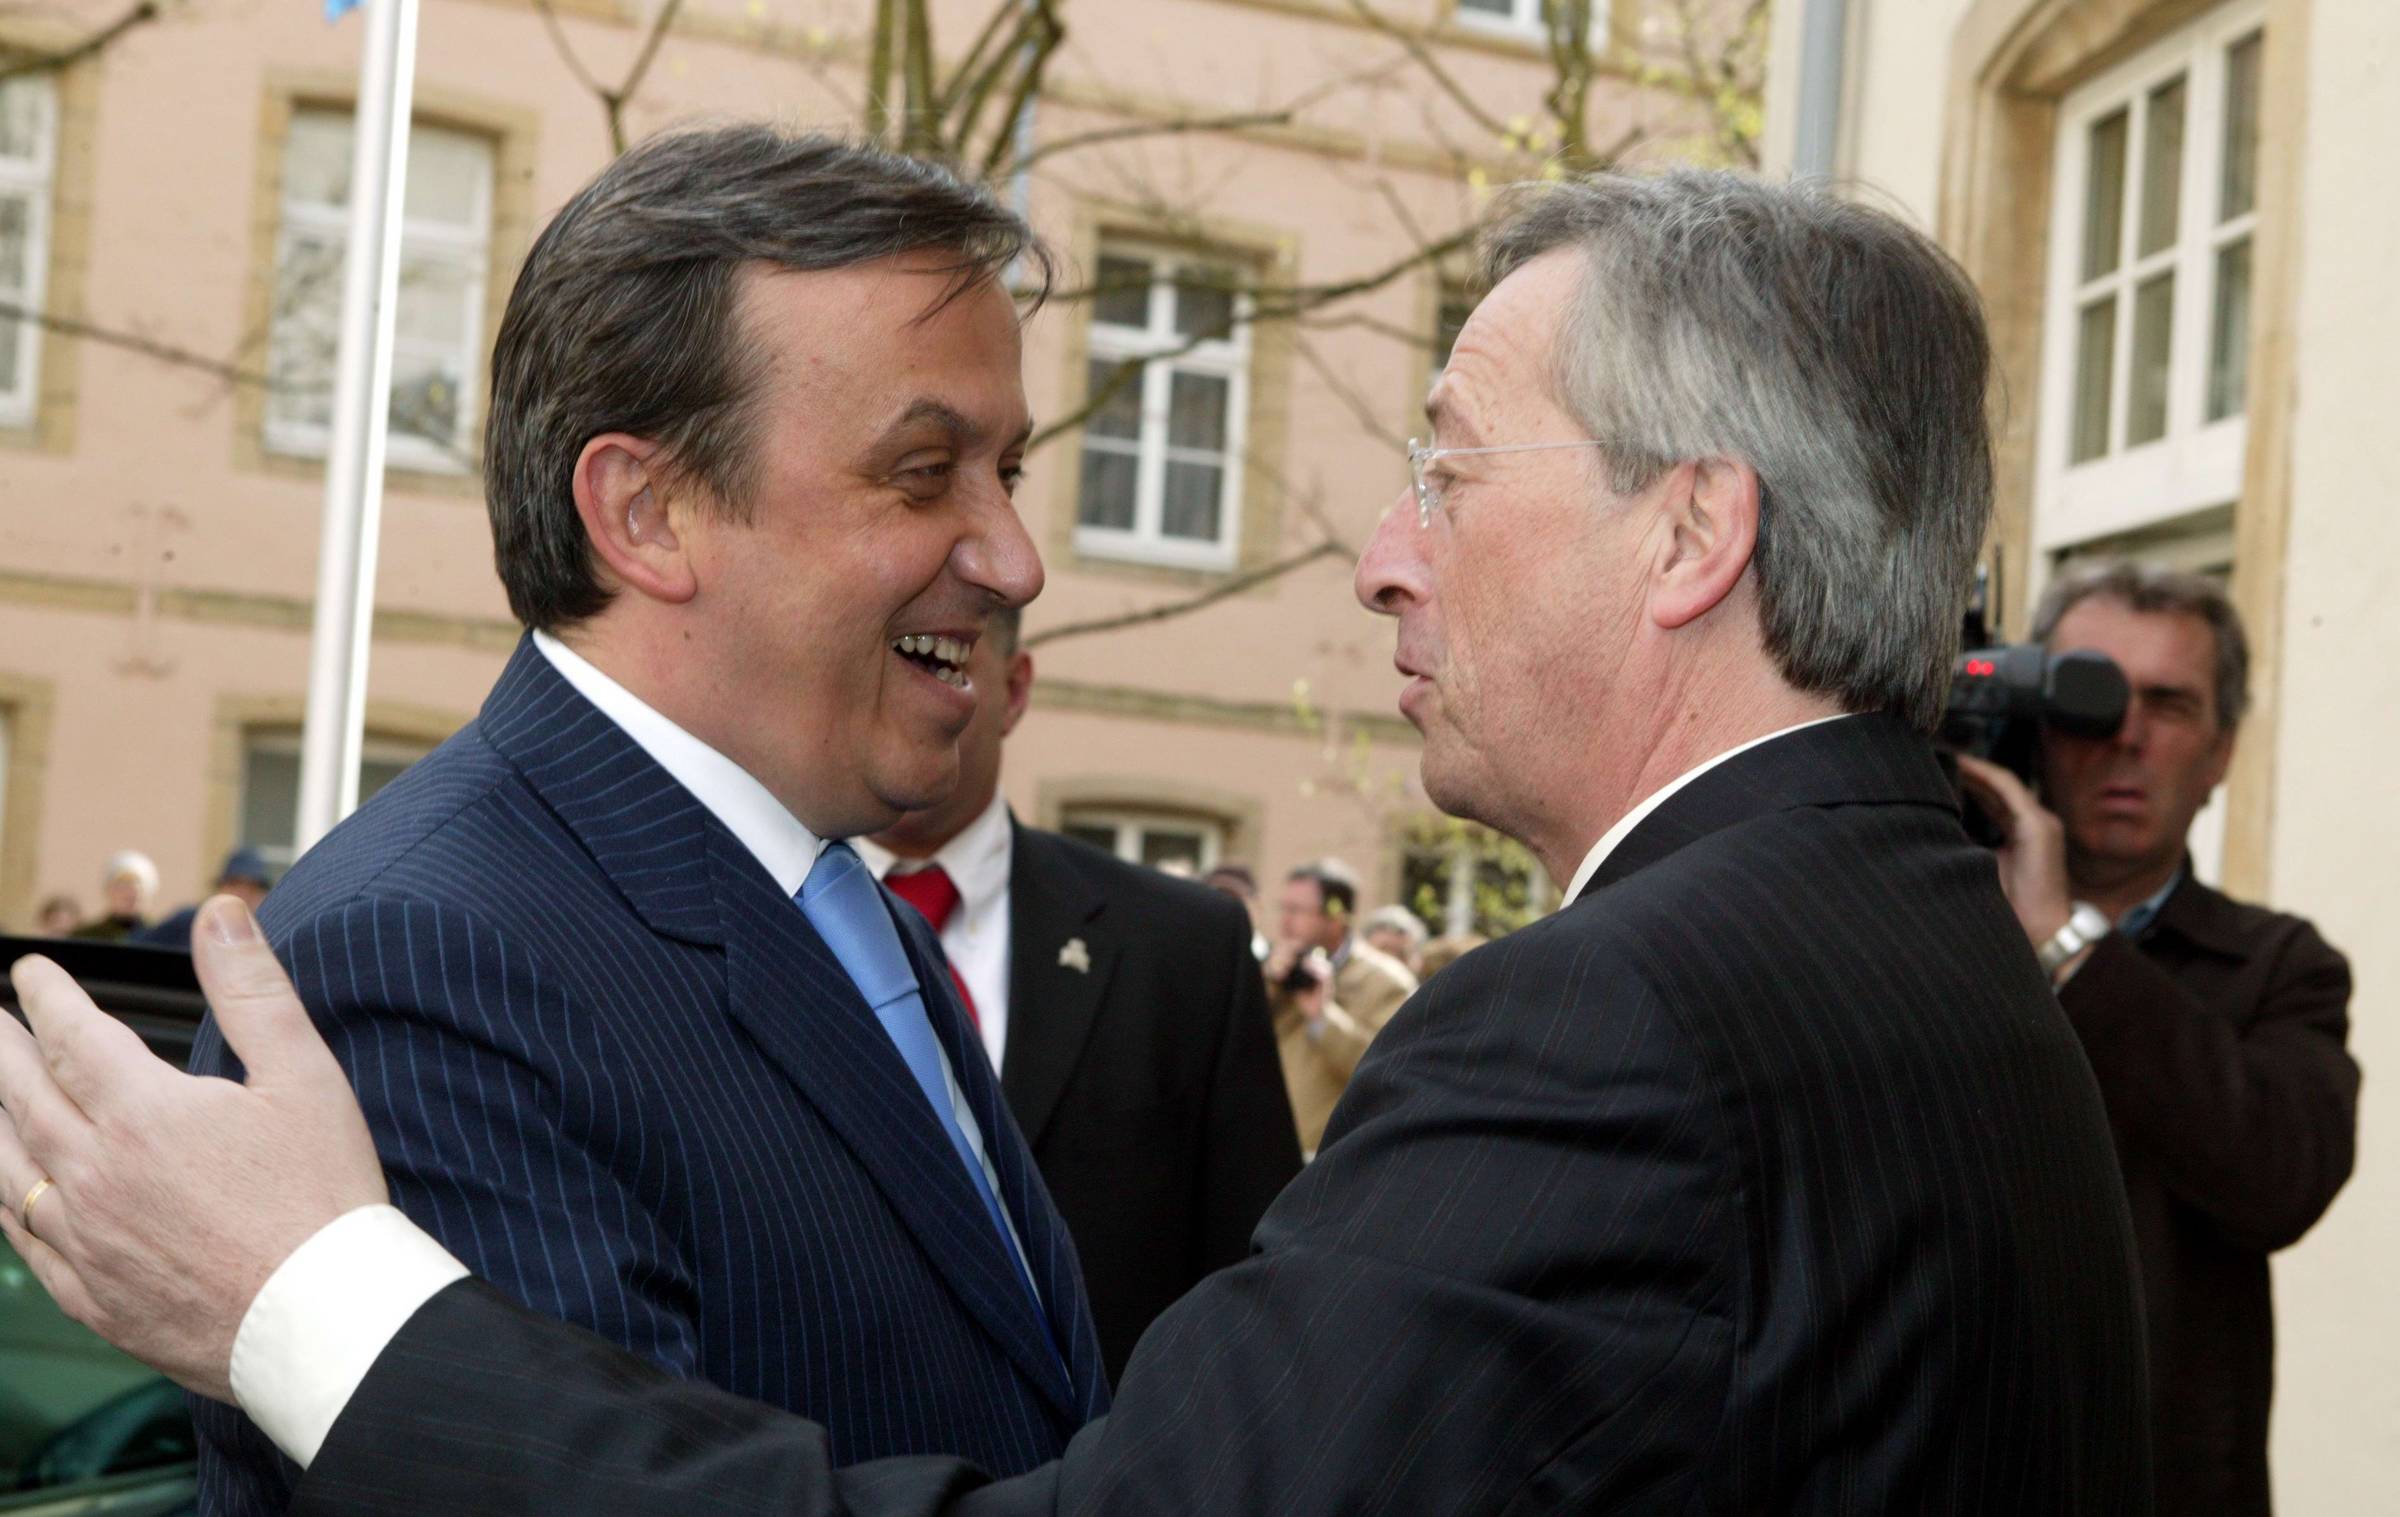 Adnan Terzić and Luxembourg‘s Prime Minister Jean-Claude Juncker in April 2005. Photo: Government of Luxembourg“ data-align=“center“ data-caption=“Adnan Terzić and Luxembourg‘s Prime Minister Jean-Claude Juncker in April 2005. <strong>Photo: Government of Luxembourg</strong>